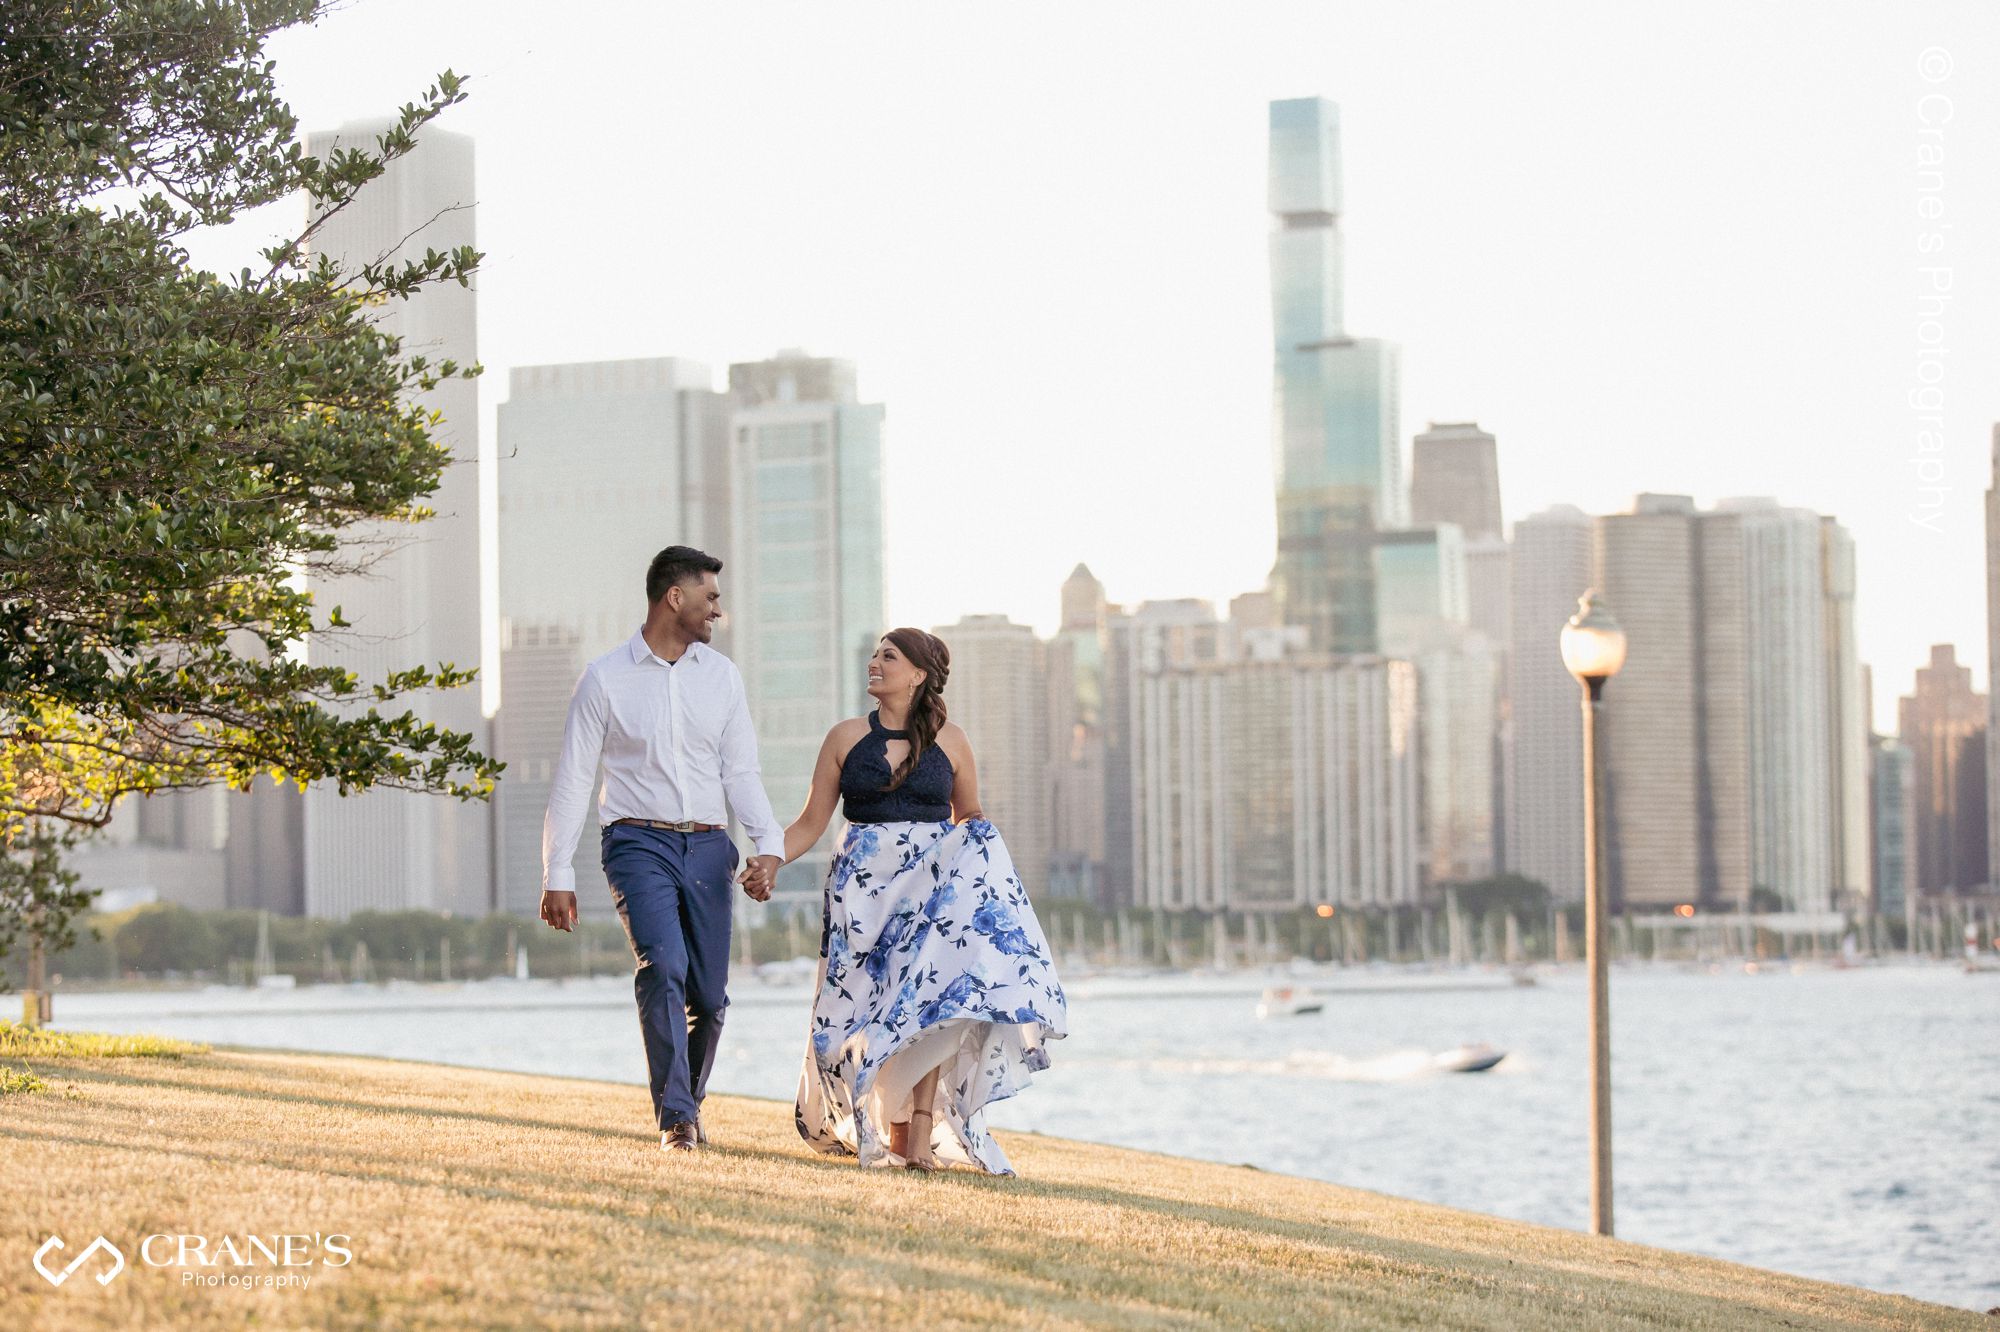 An engagement session photo showing downtown Chicago in the background